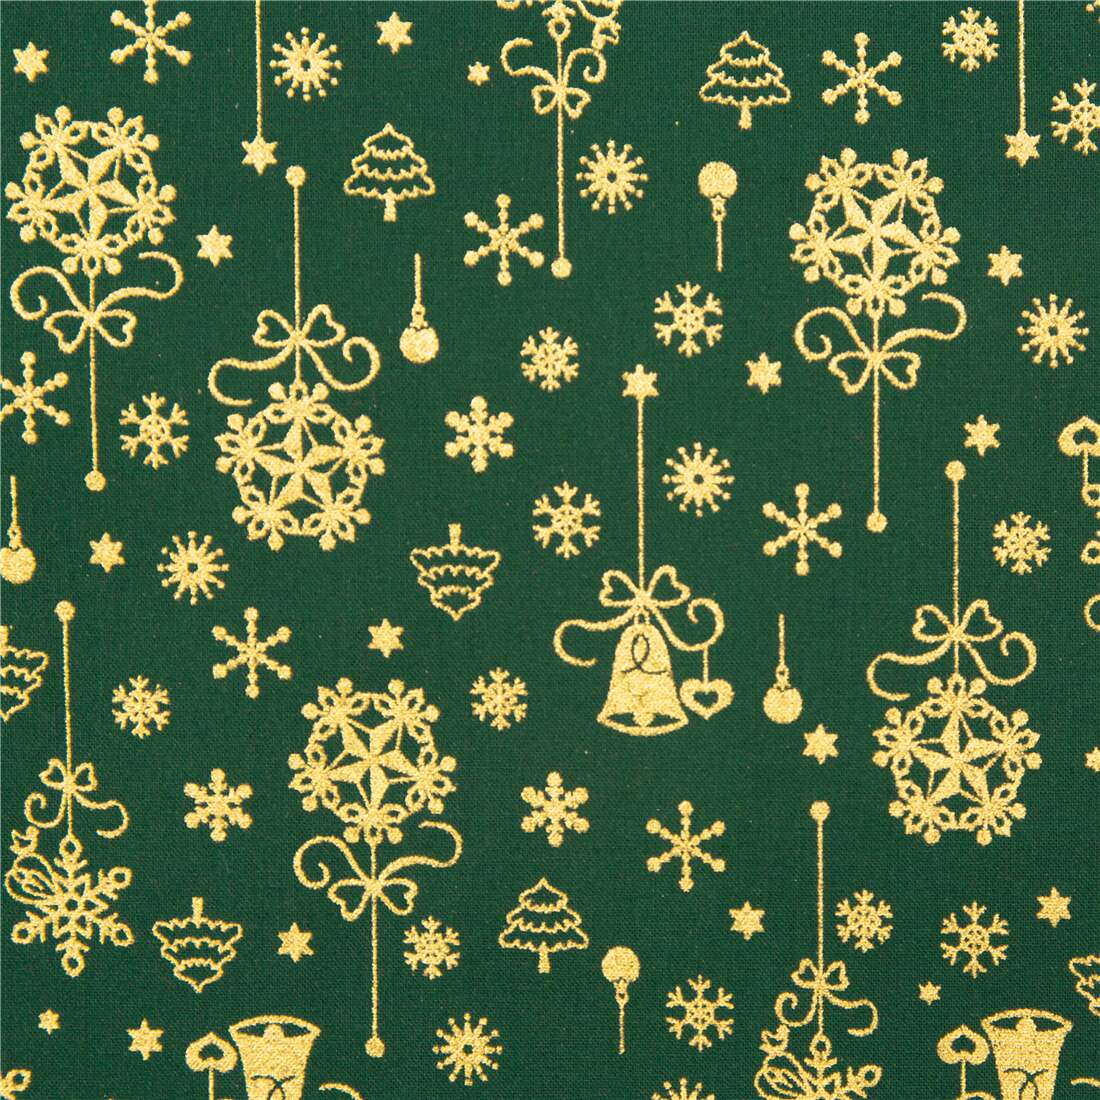 Green Christmas fabric metallic gold decorations snowflakes Fabric by ...